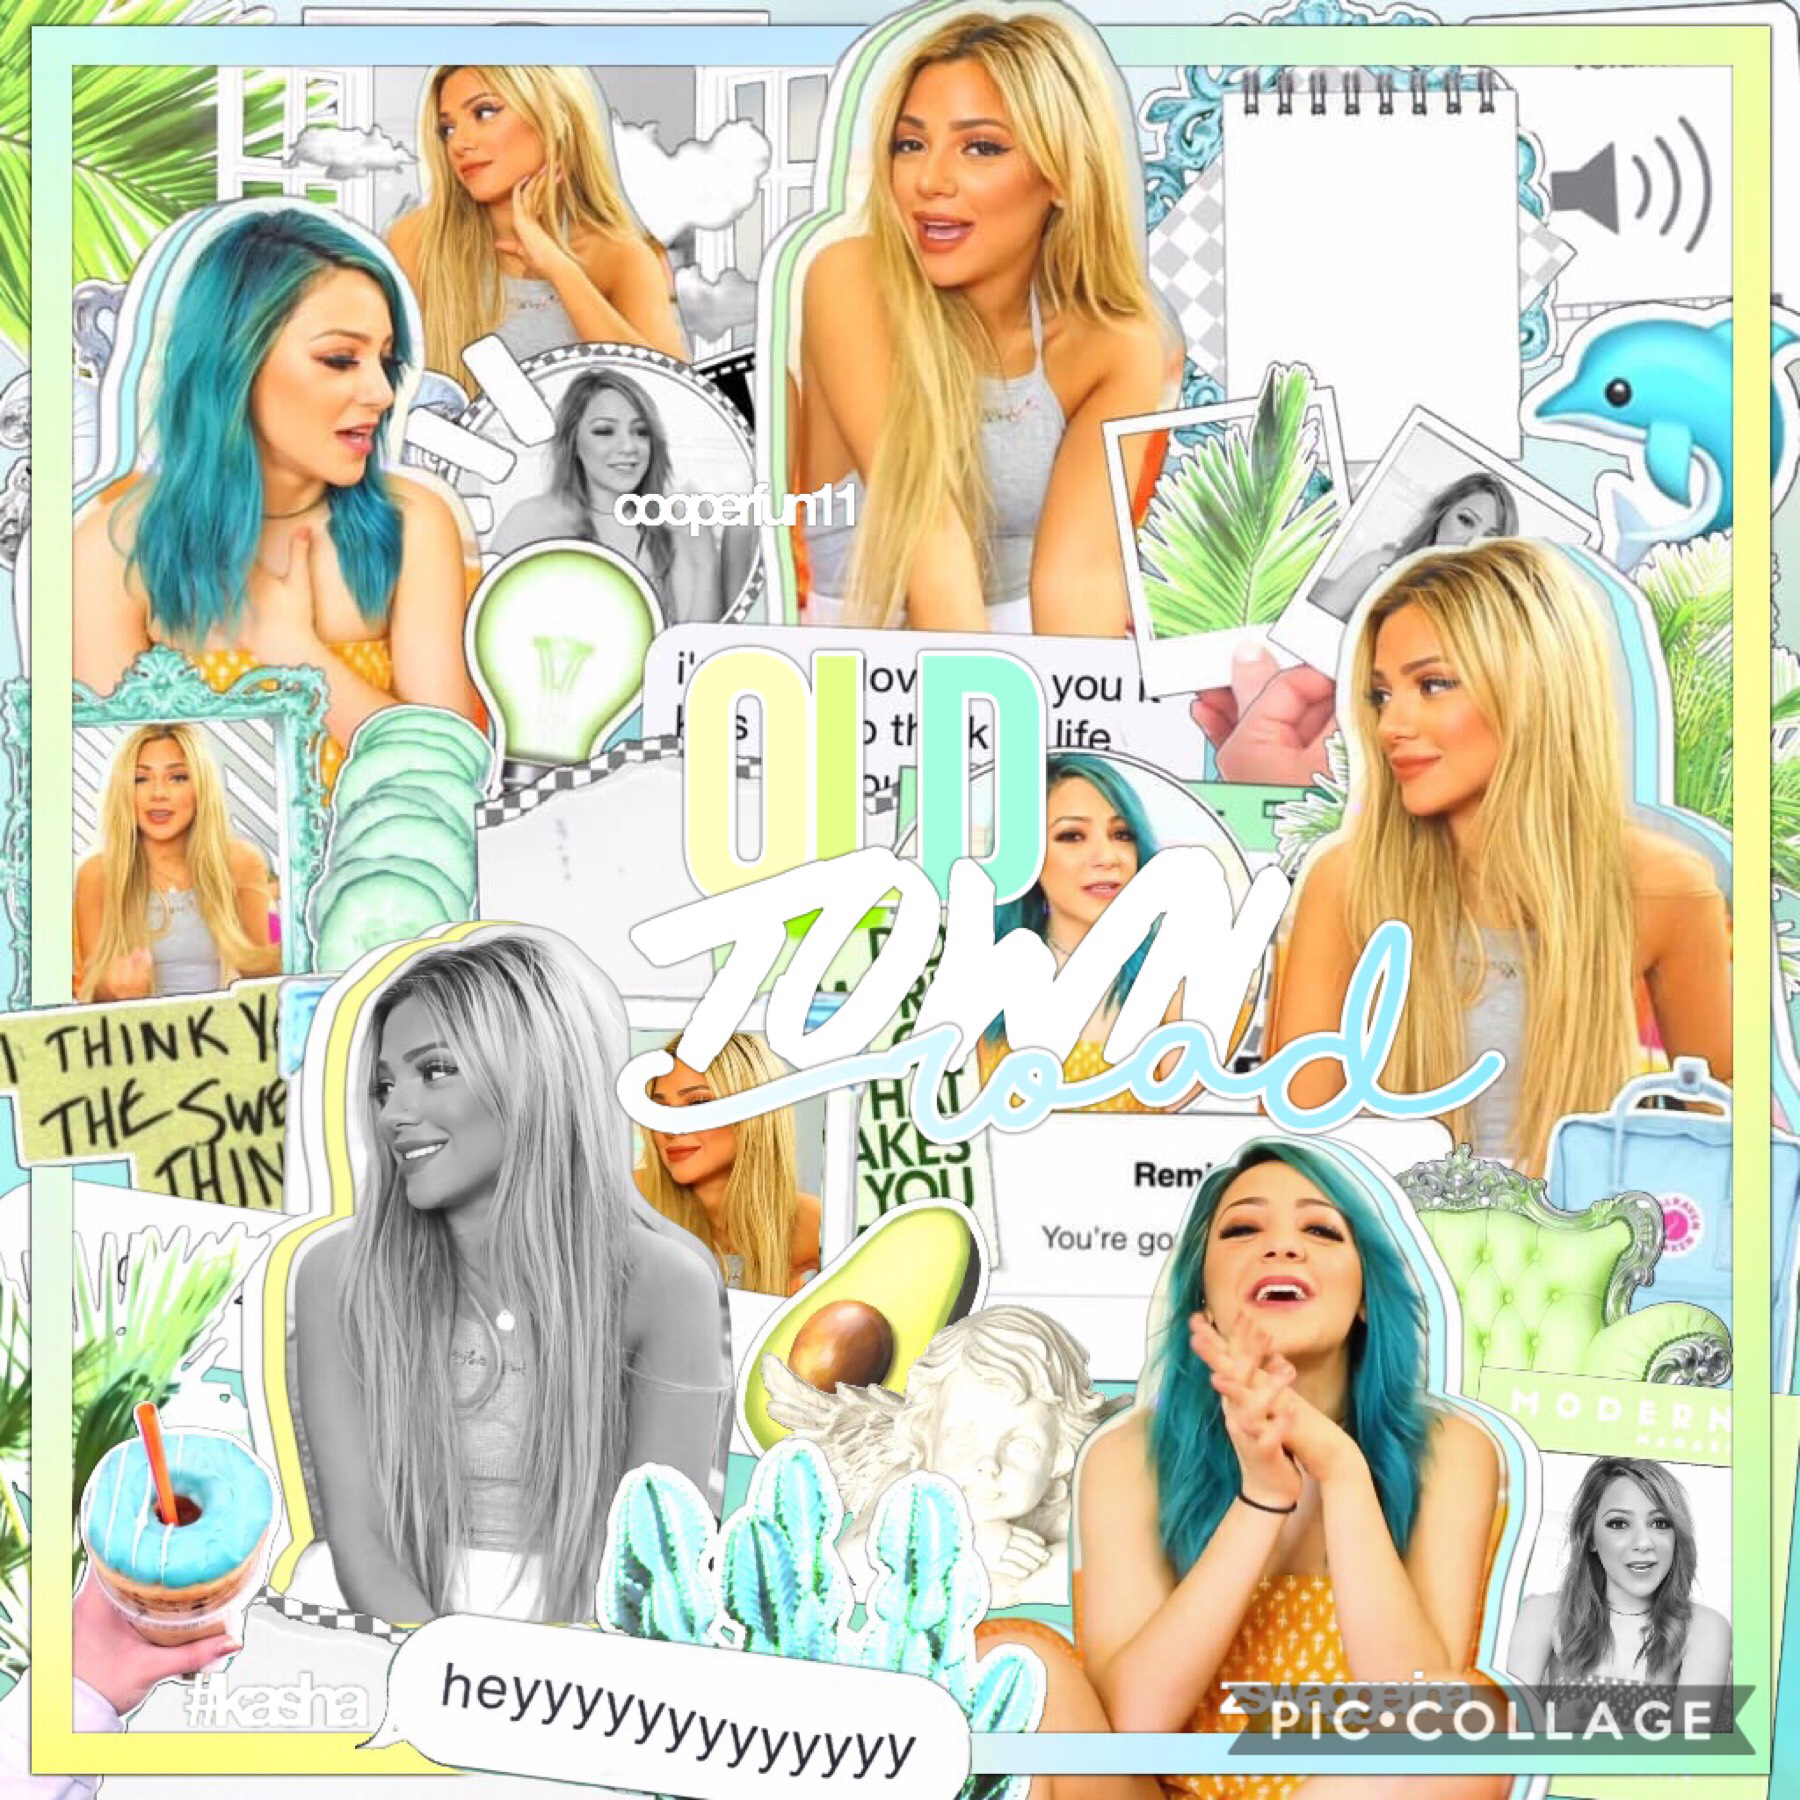 super duper awesome summer collab with my #1 @cooperfun11 🌵💗 i’m loving it 🤩 what are your plans this summer? 🏝